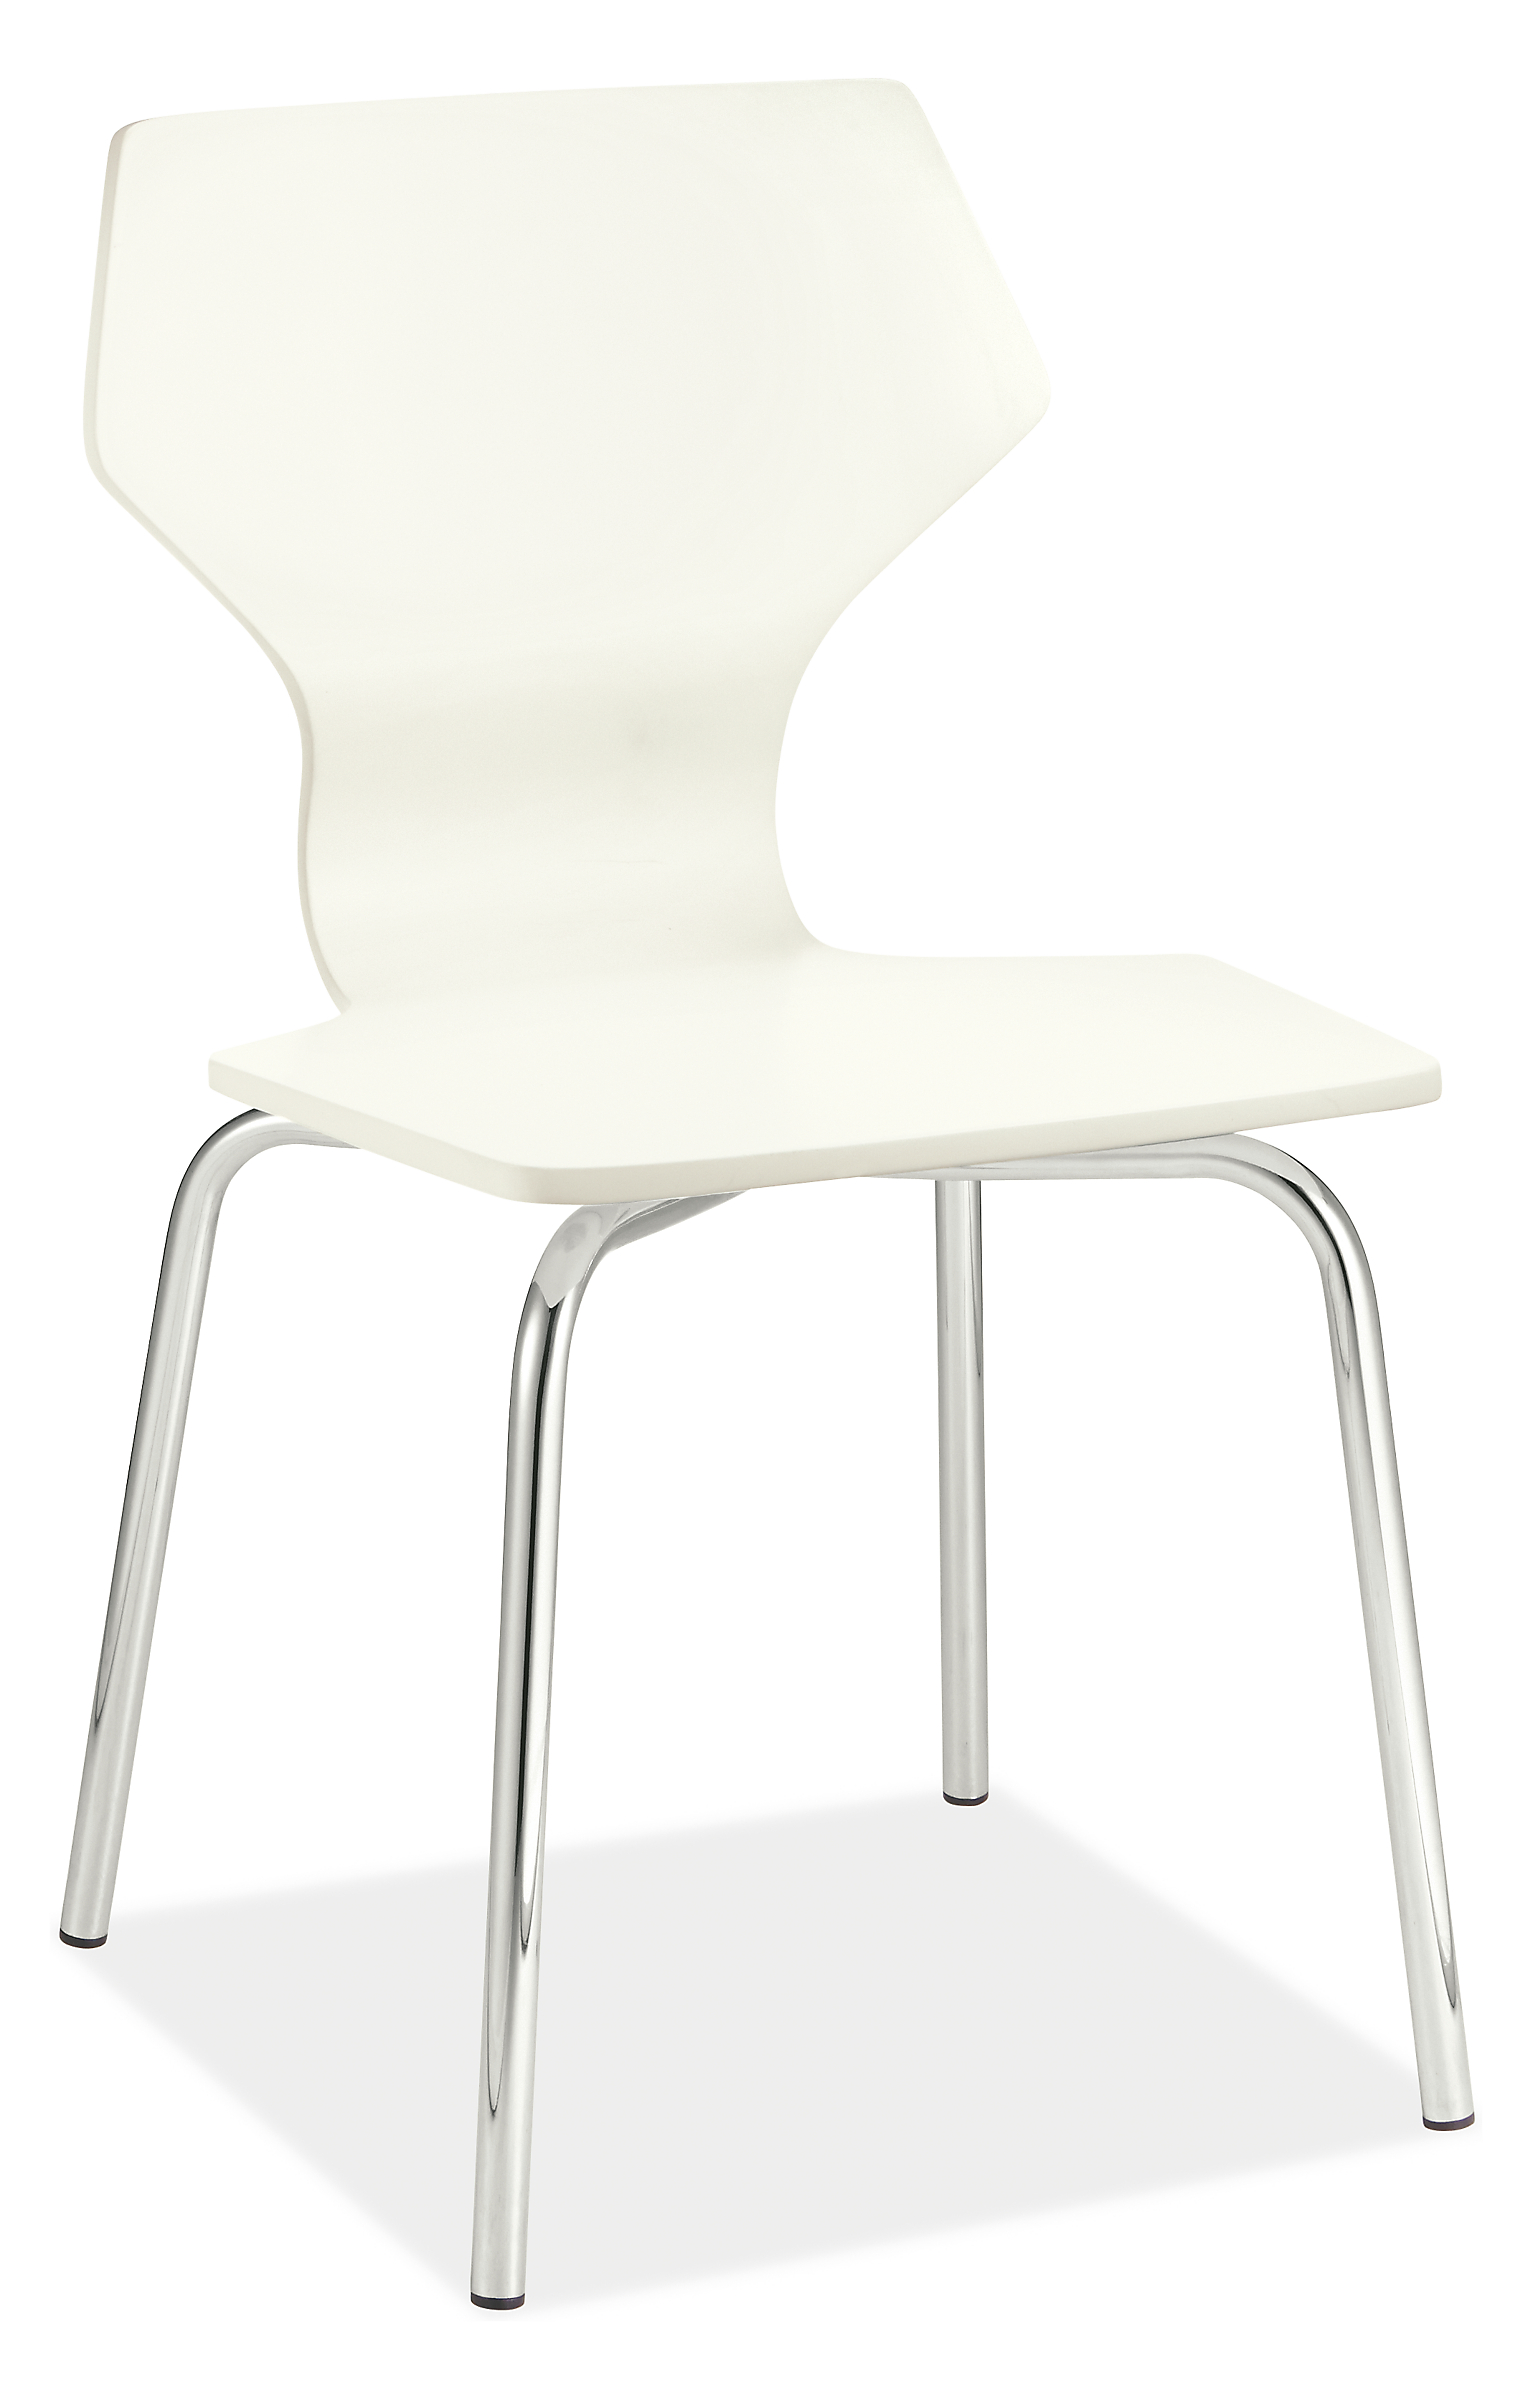 Perch Chair in White with Chrome Base